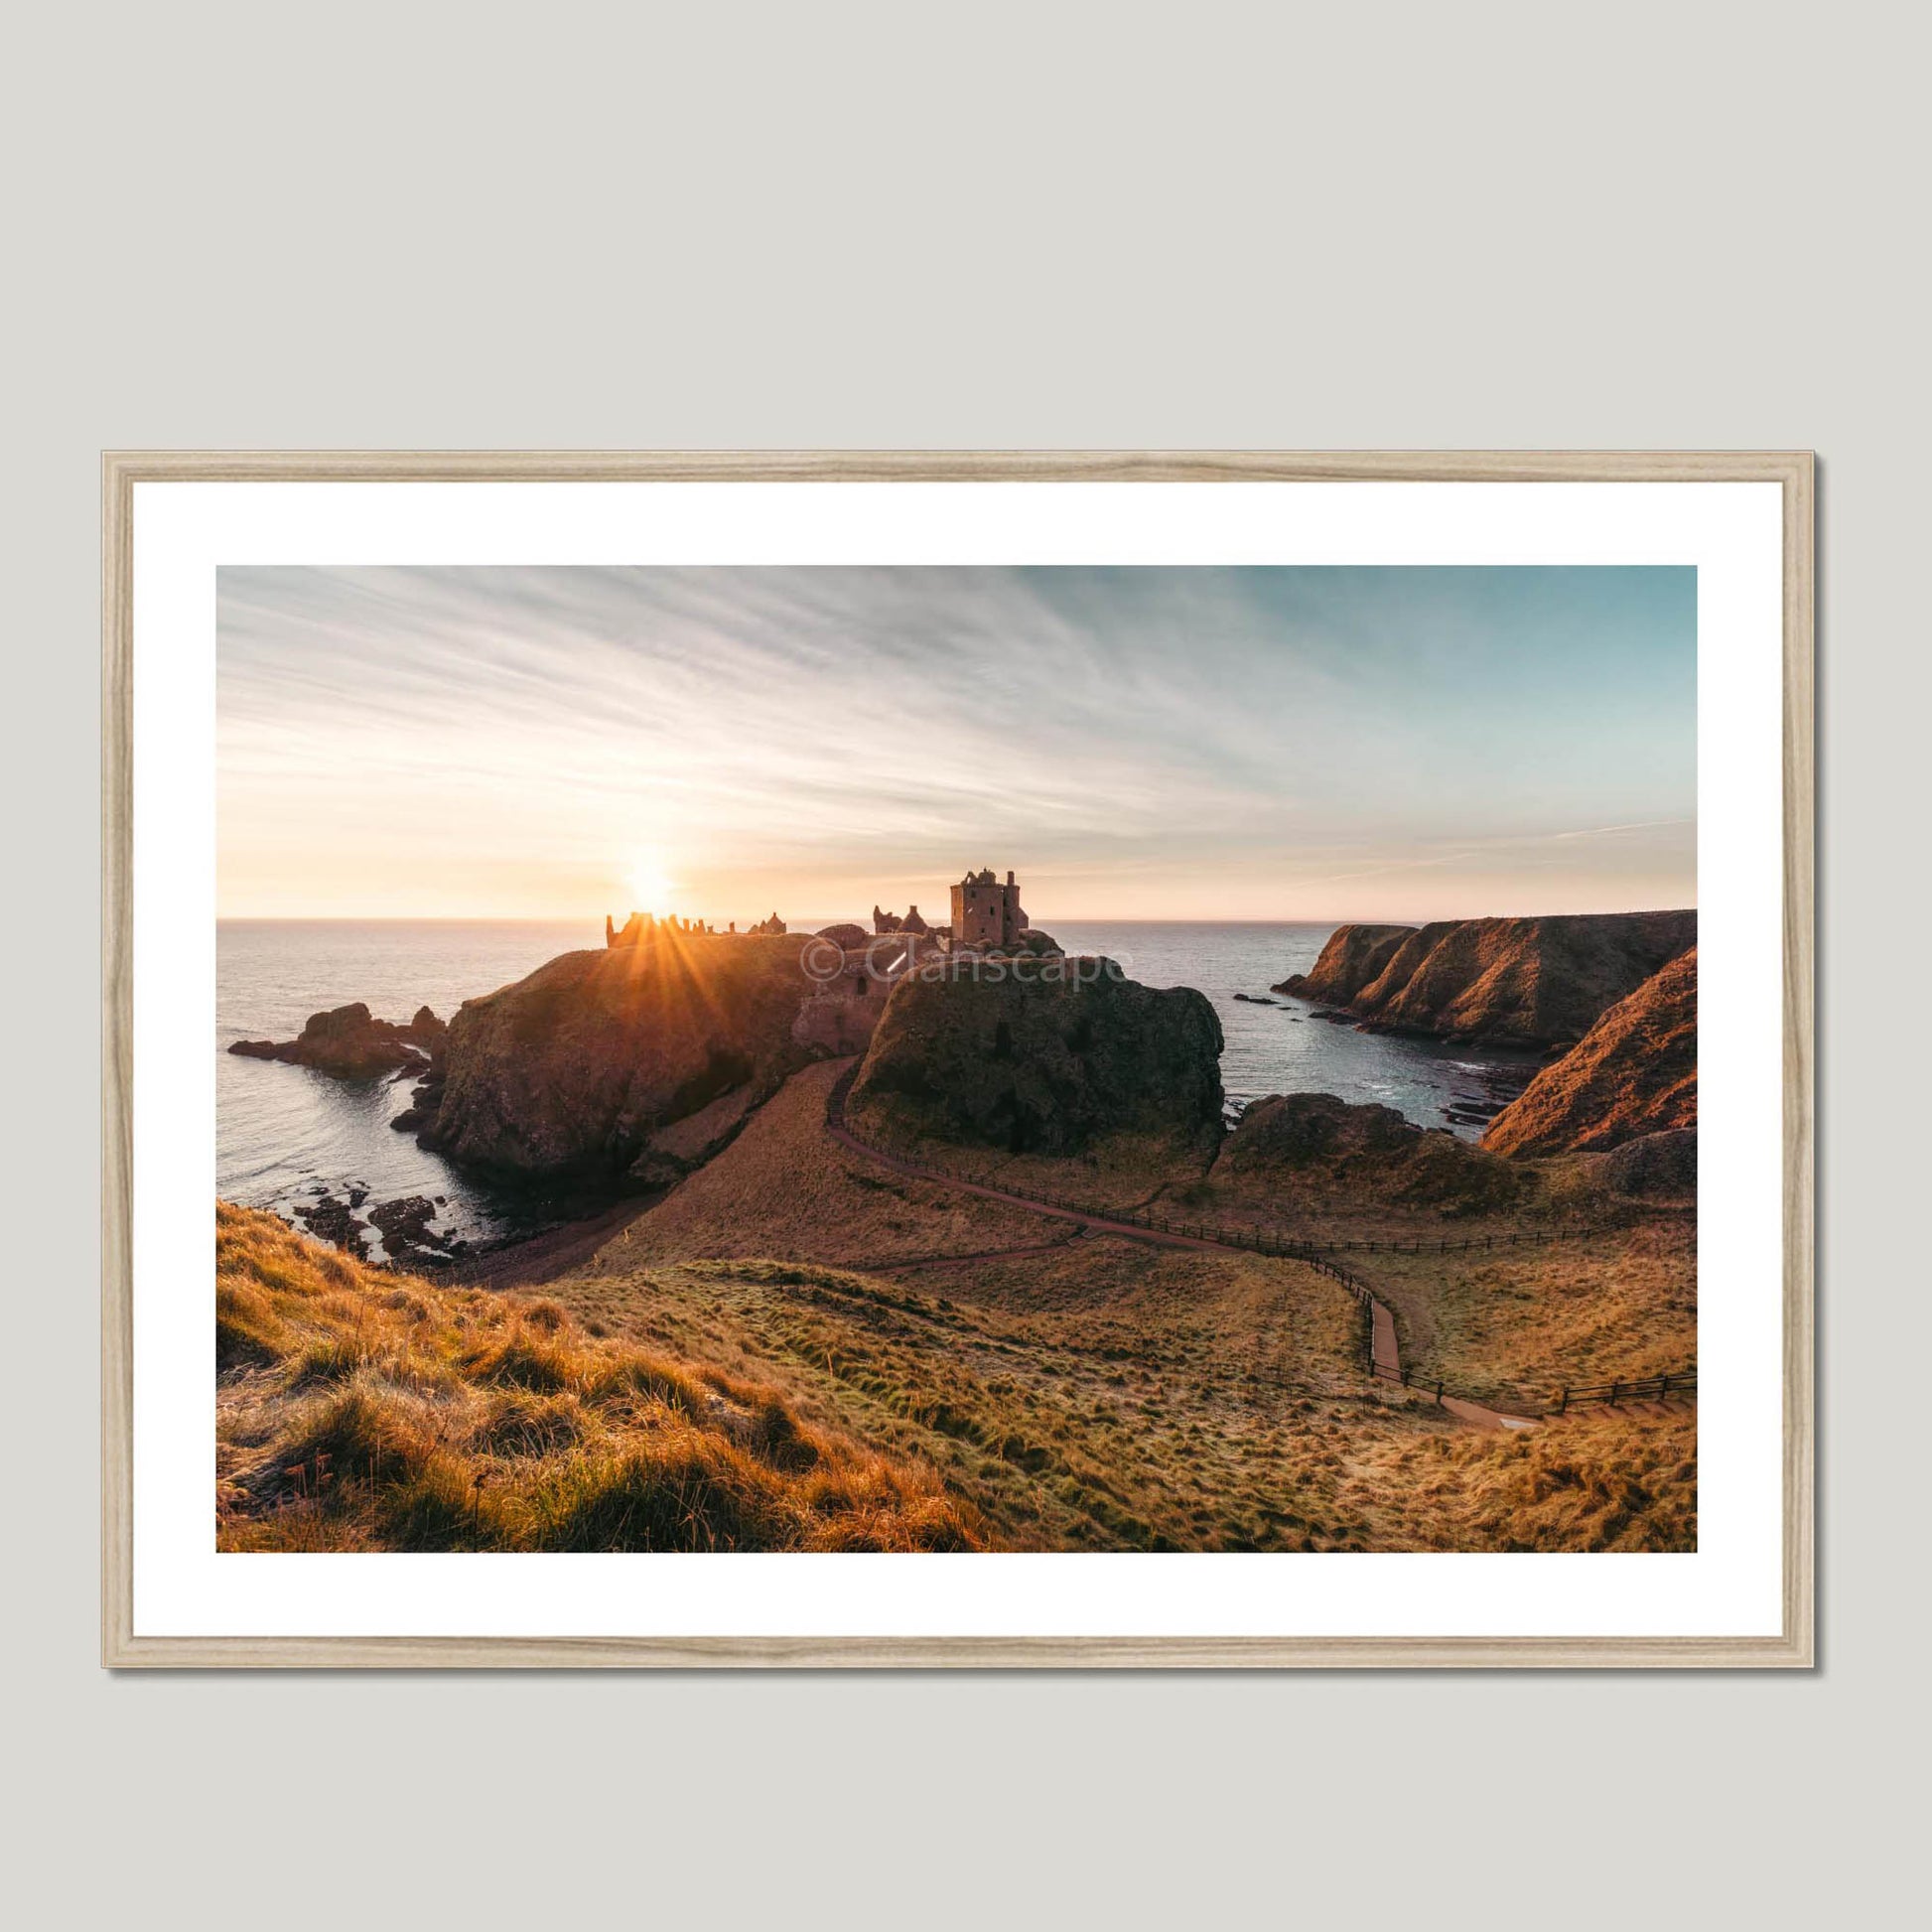 Clan Keith - Dunnotter Castle - Framed & Mounted Photo Print 40"x28" Natural